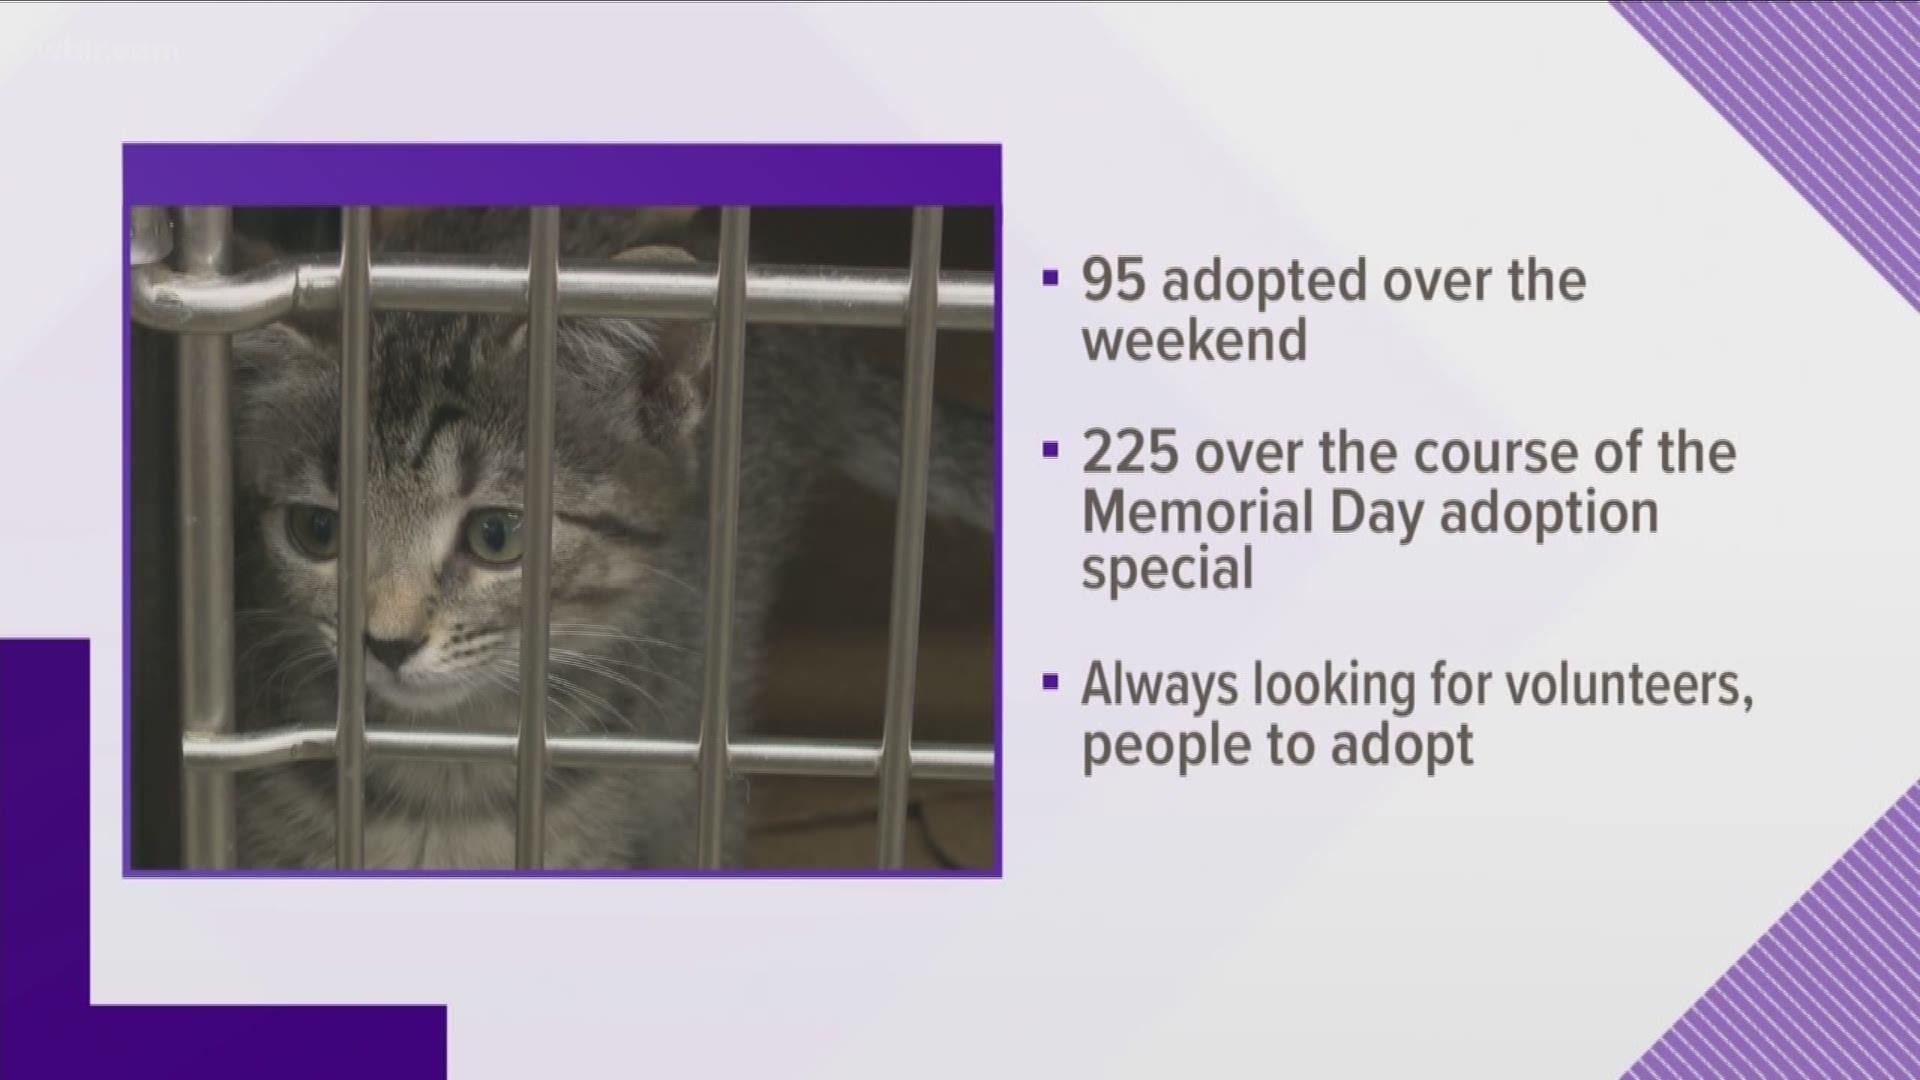 Over the course of the shelter's extended Memorial Day adoption deals, 225 pets found new homes.